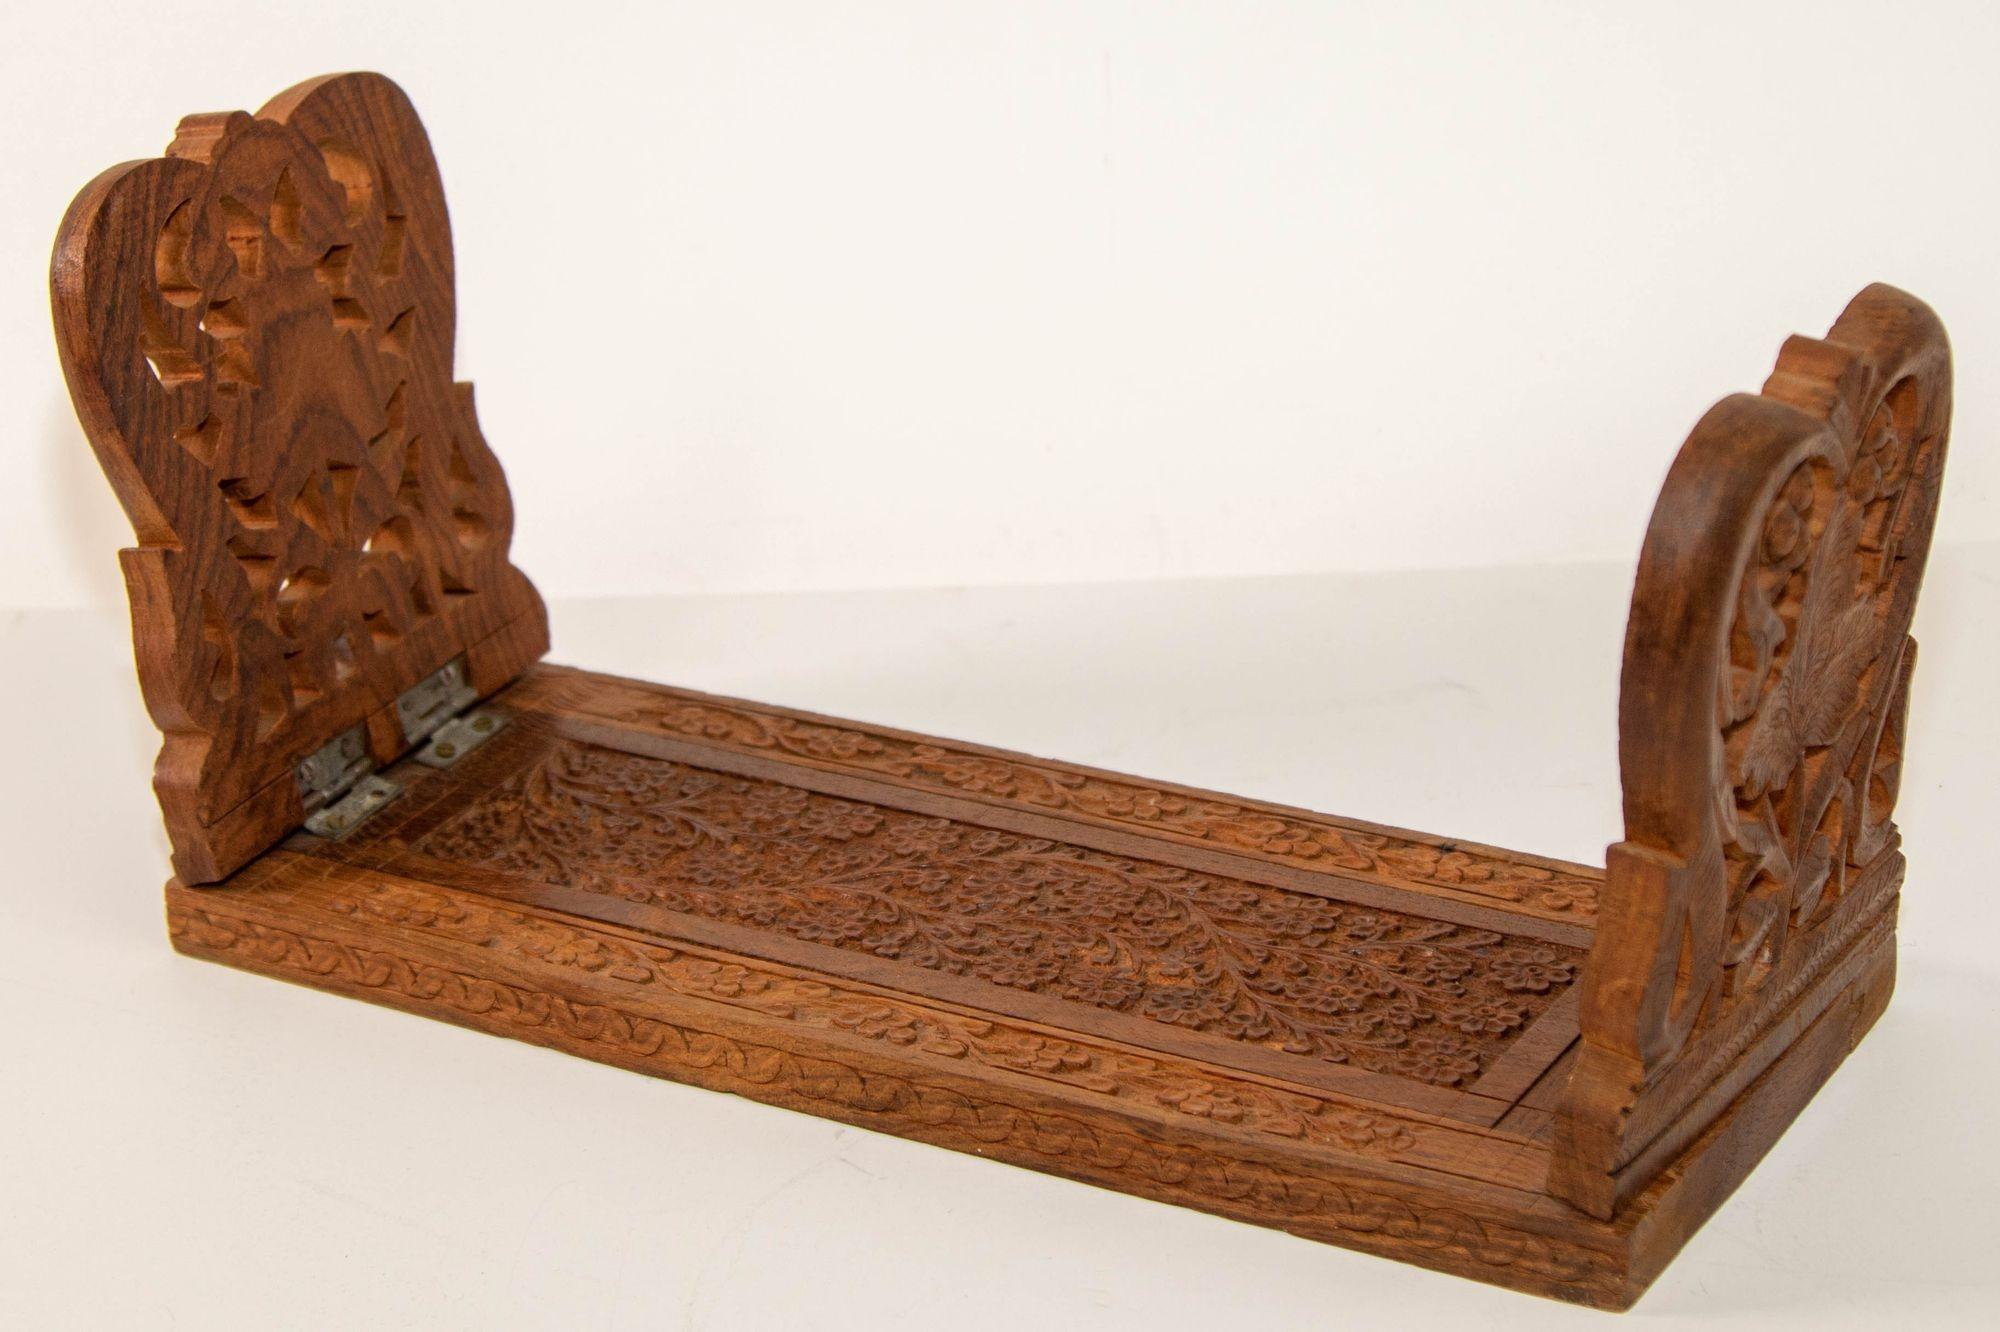 Expandable Book shelf hand carved teak wood book Bookends from India, circa 1950s.
Book holder from India intricately hand carved teak wood book rack holder and will expands to 20 inches.
Vintage wooden leaf book rack.
Boho style carved wood